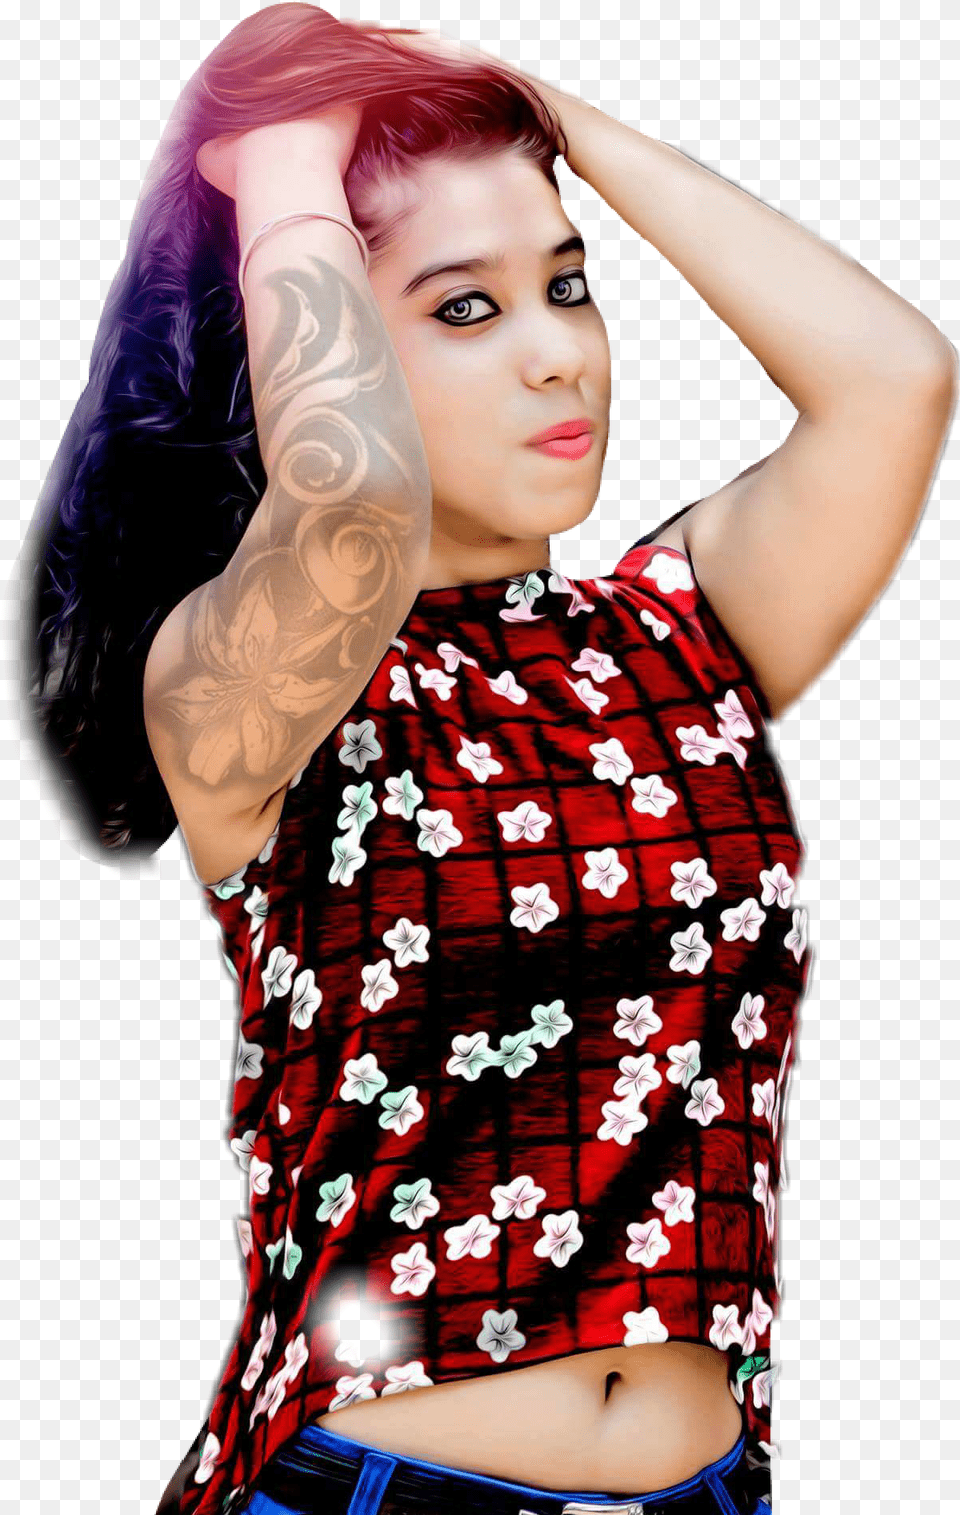 Cb Girl Girl For Picsart, Person, Skin, Tattoo, Adult Png Image